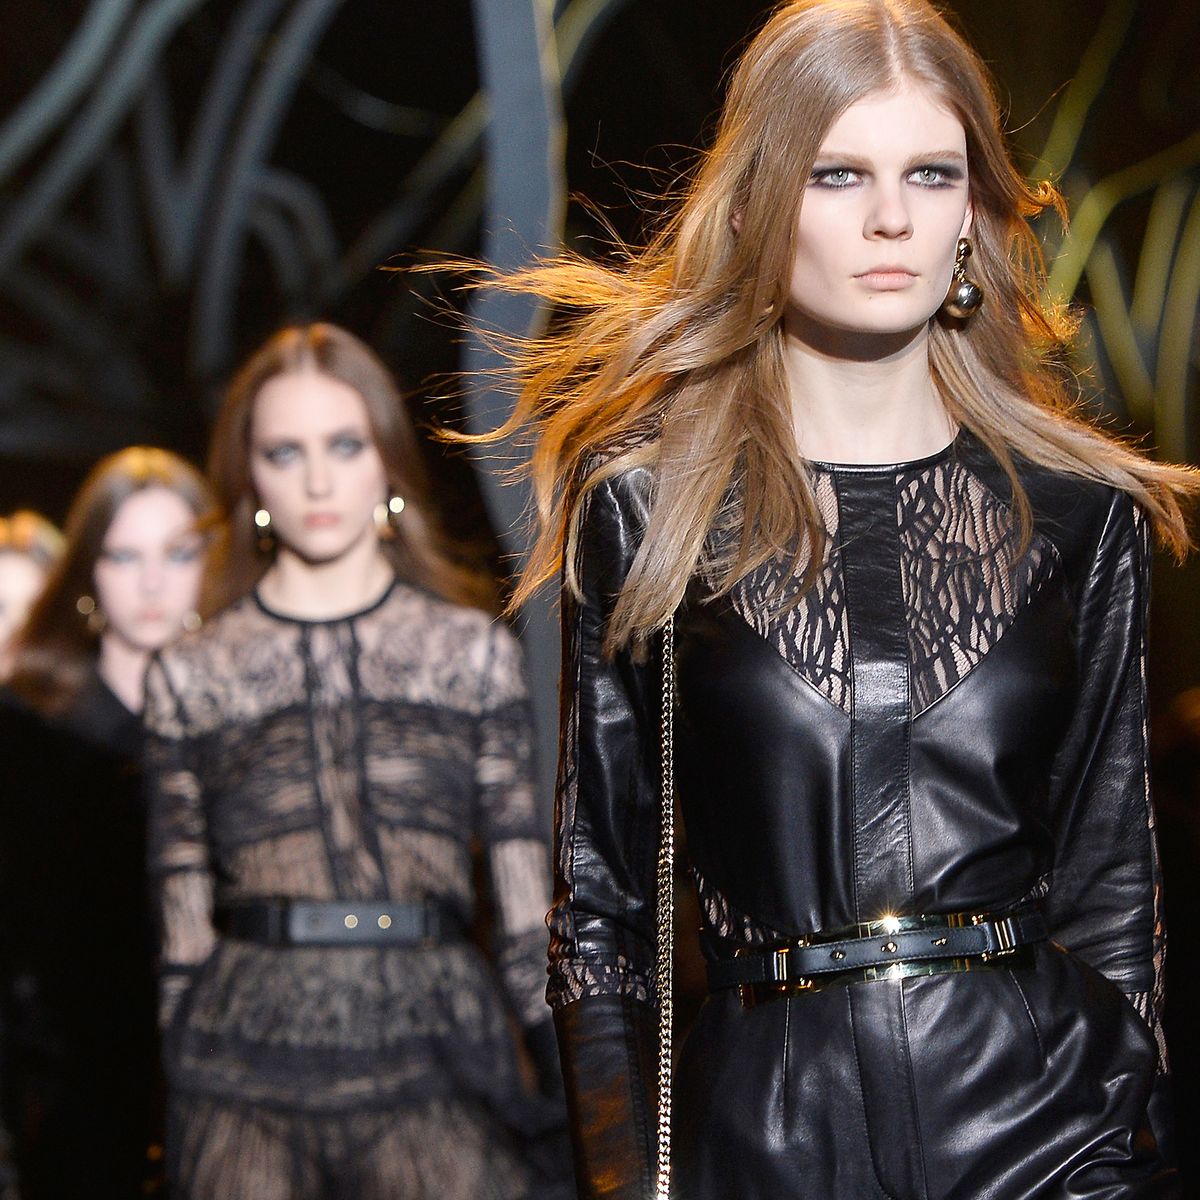 Major: France Is Likely Going to Ban Dangerously Thin Runway Models ...